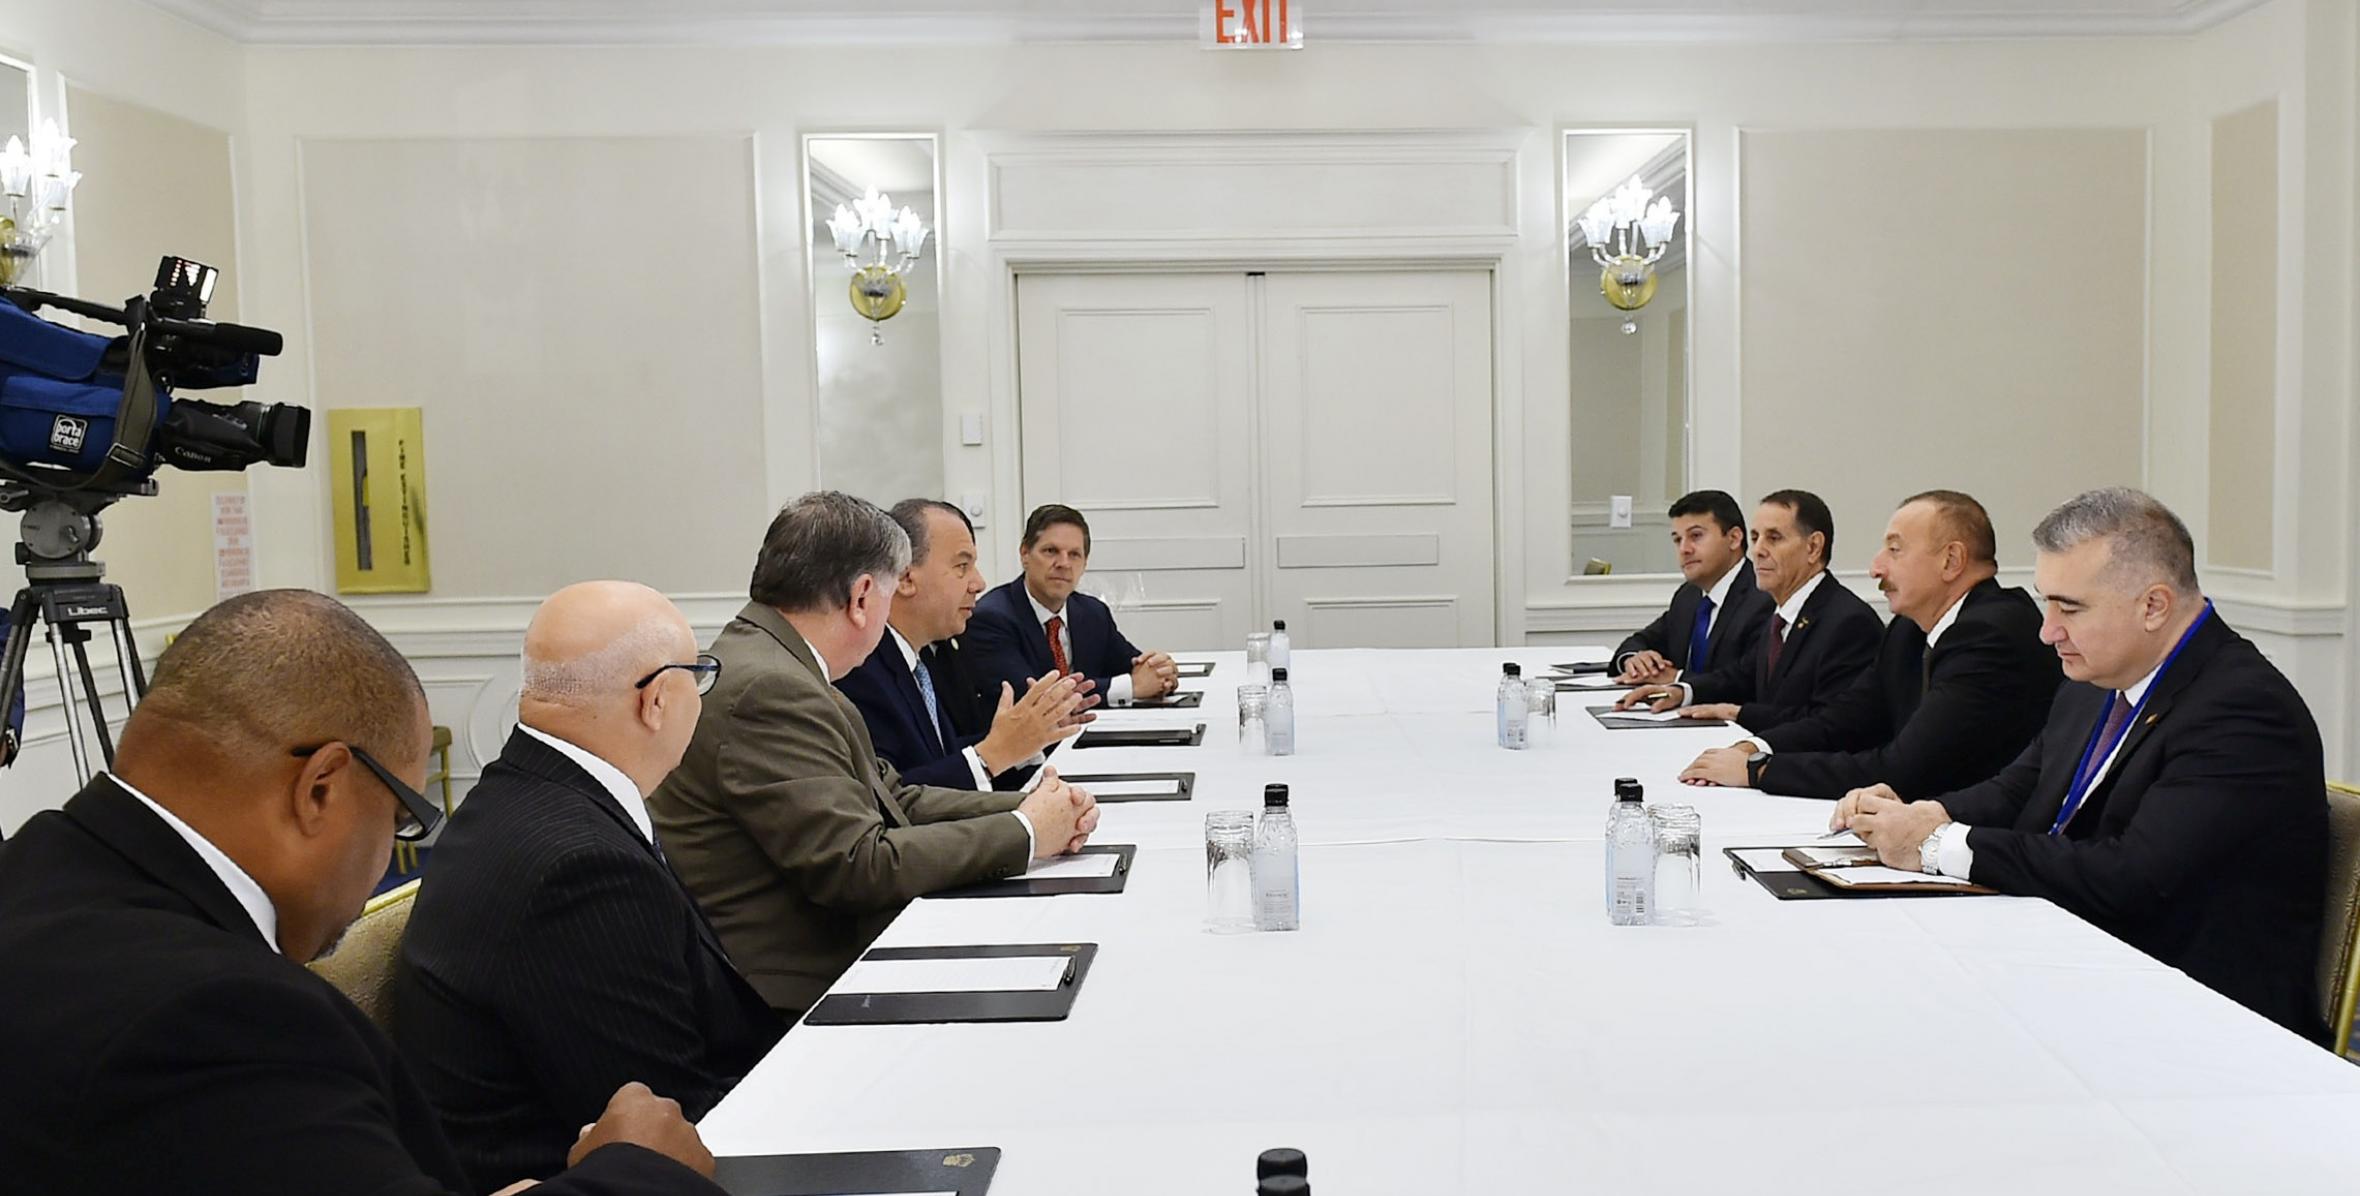 Ilham Aliyev met with chairman of US-based Foundation for Ethnic Understanding in New York